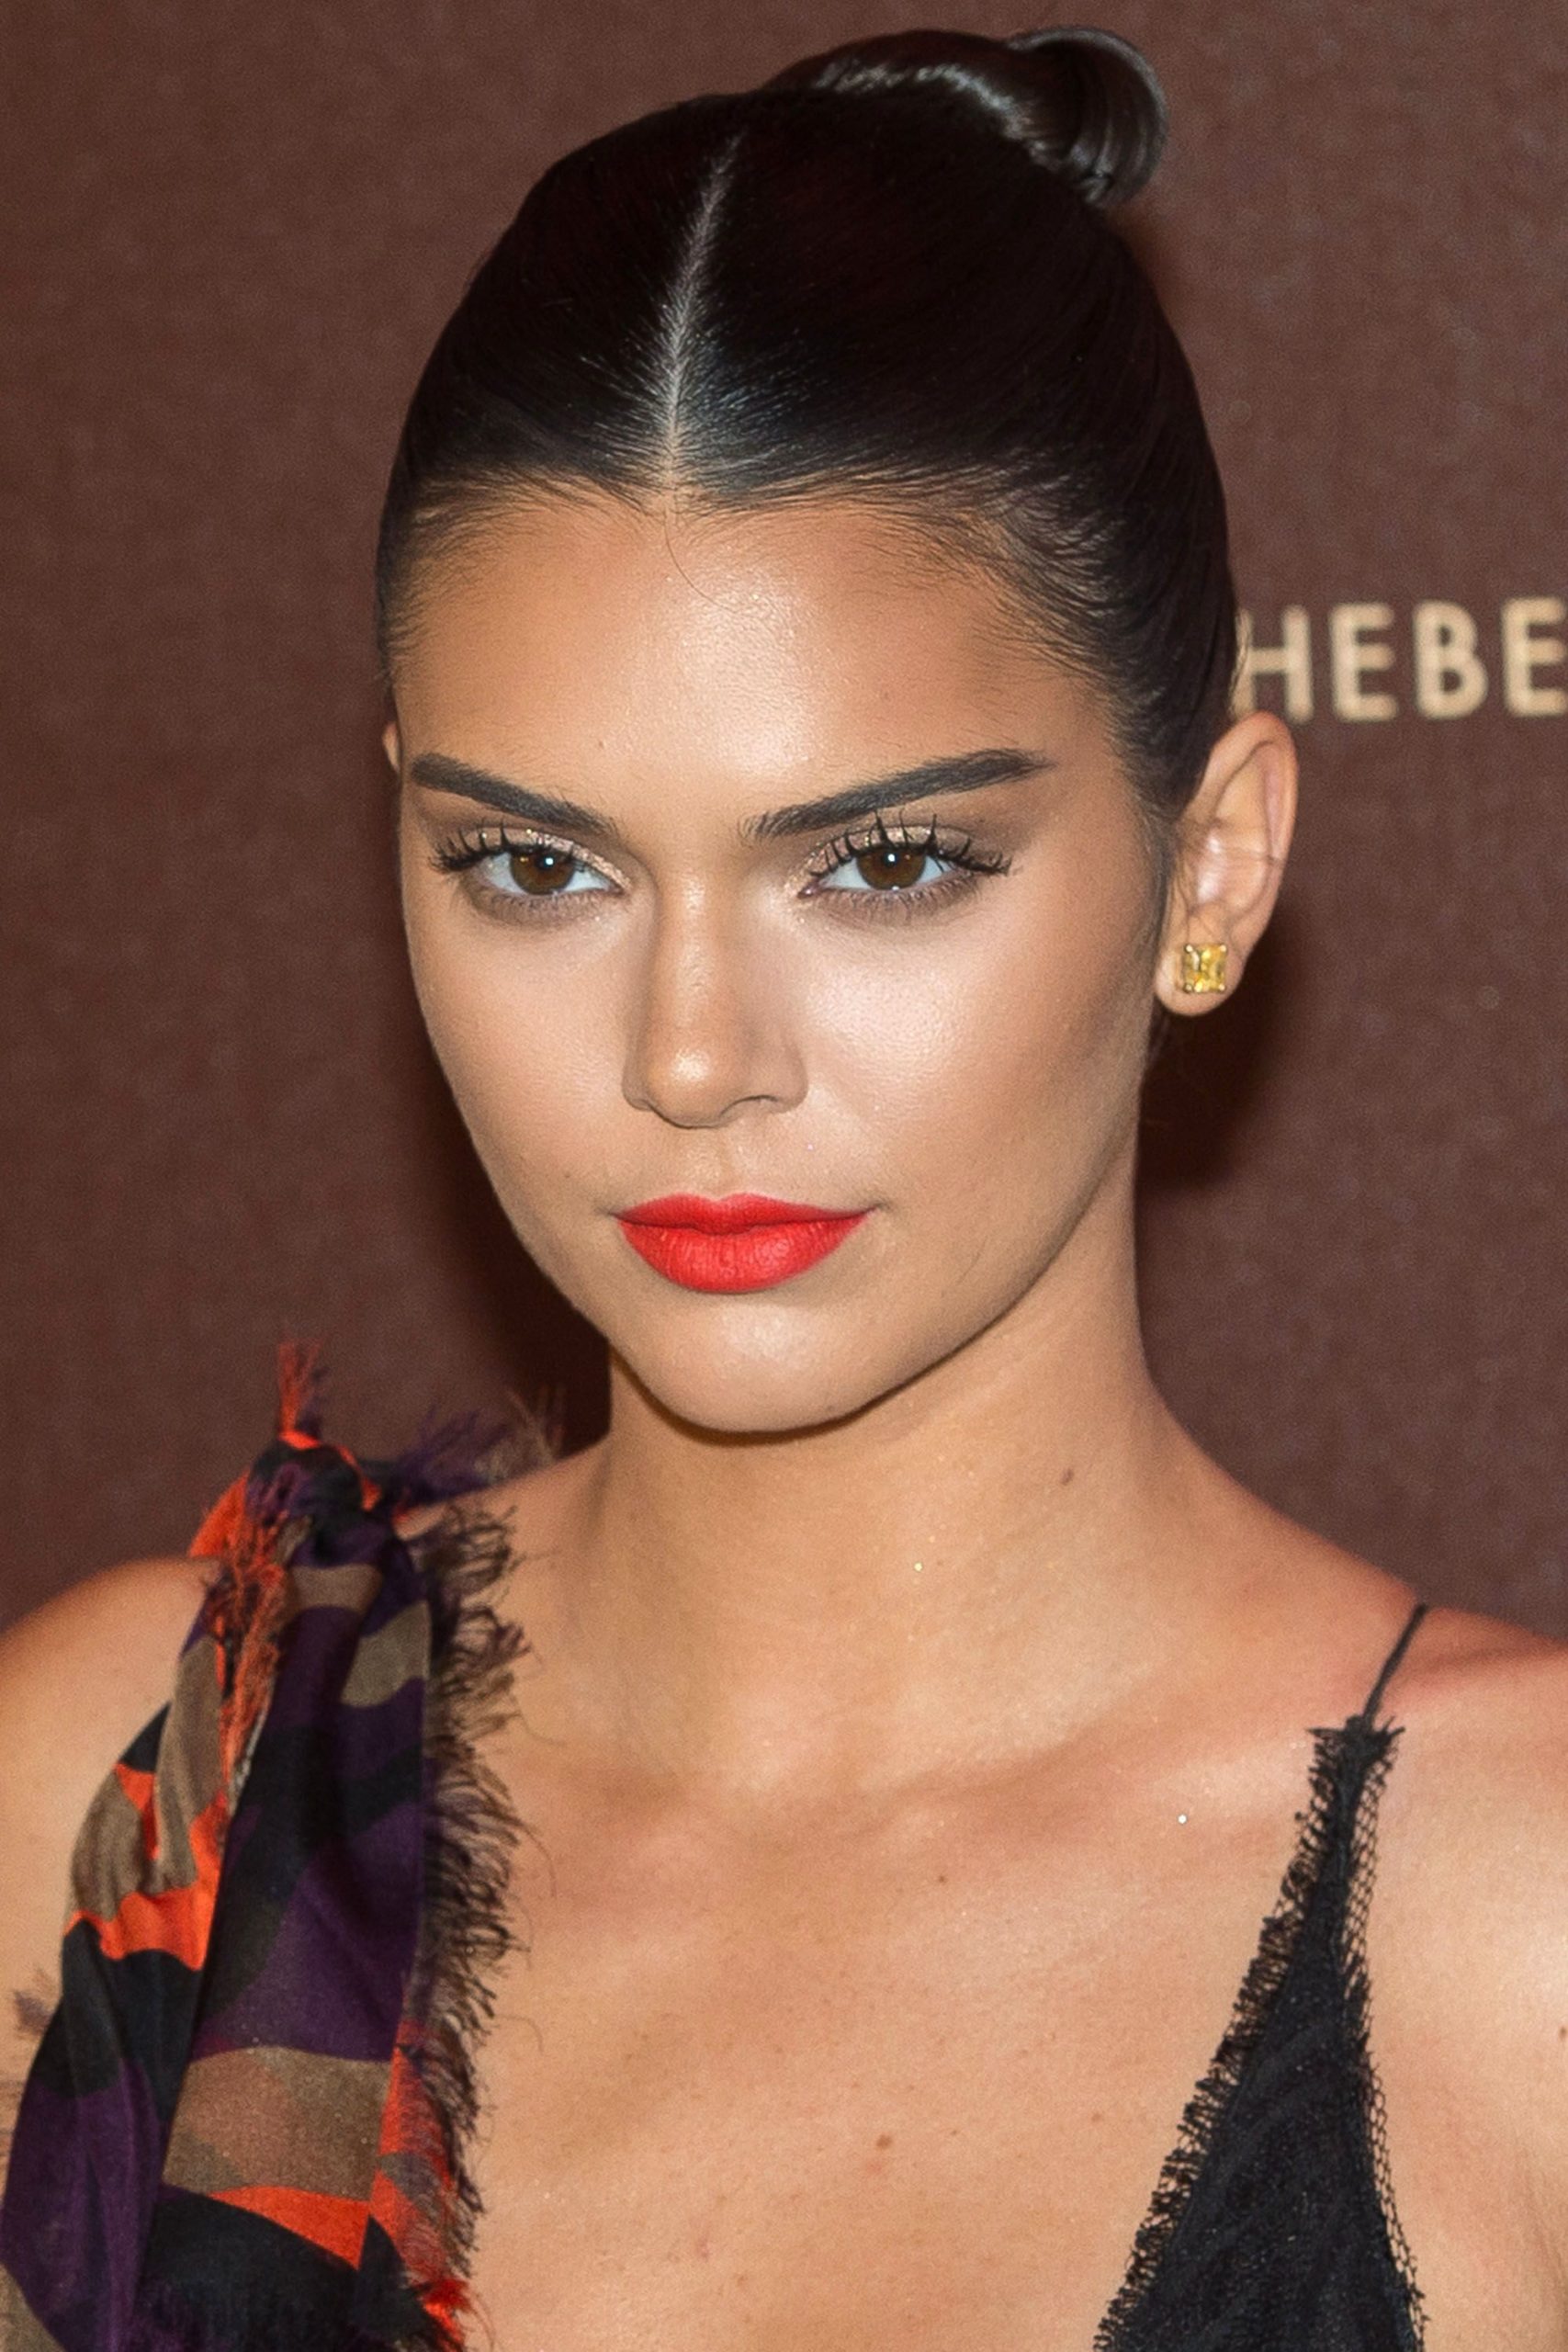 Stunning Sleek Up-do Is Finally Getting Its Time In The Spotlight